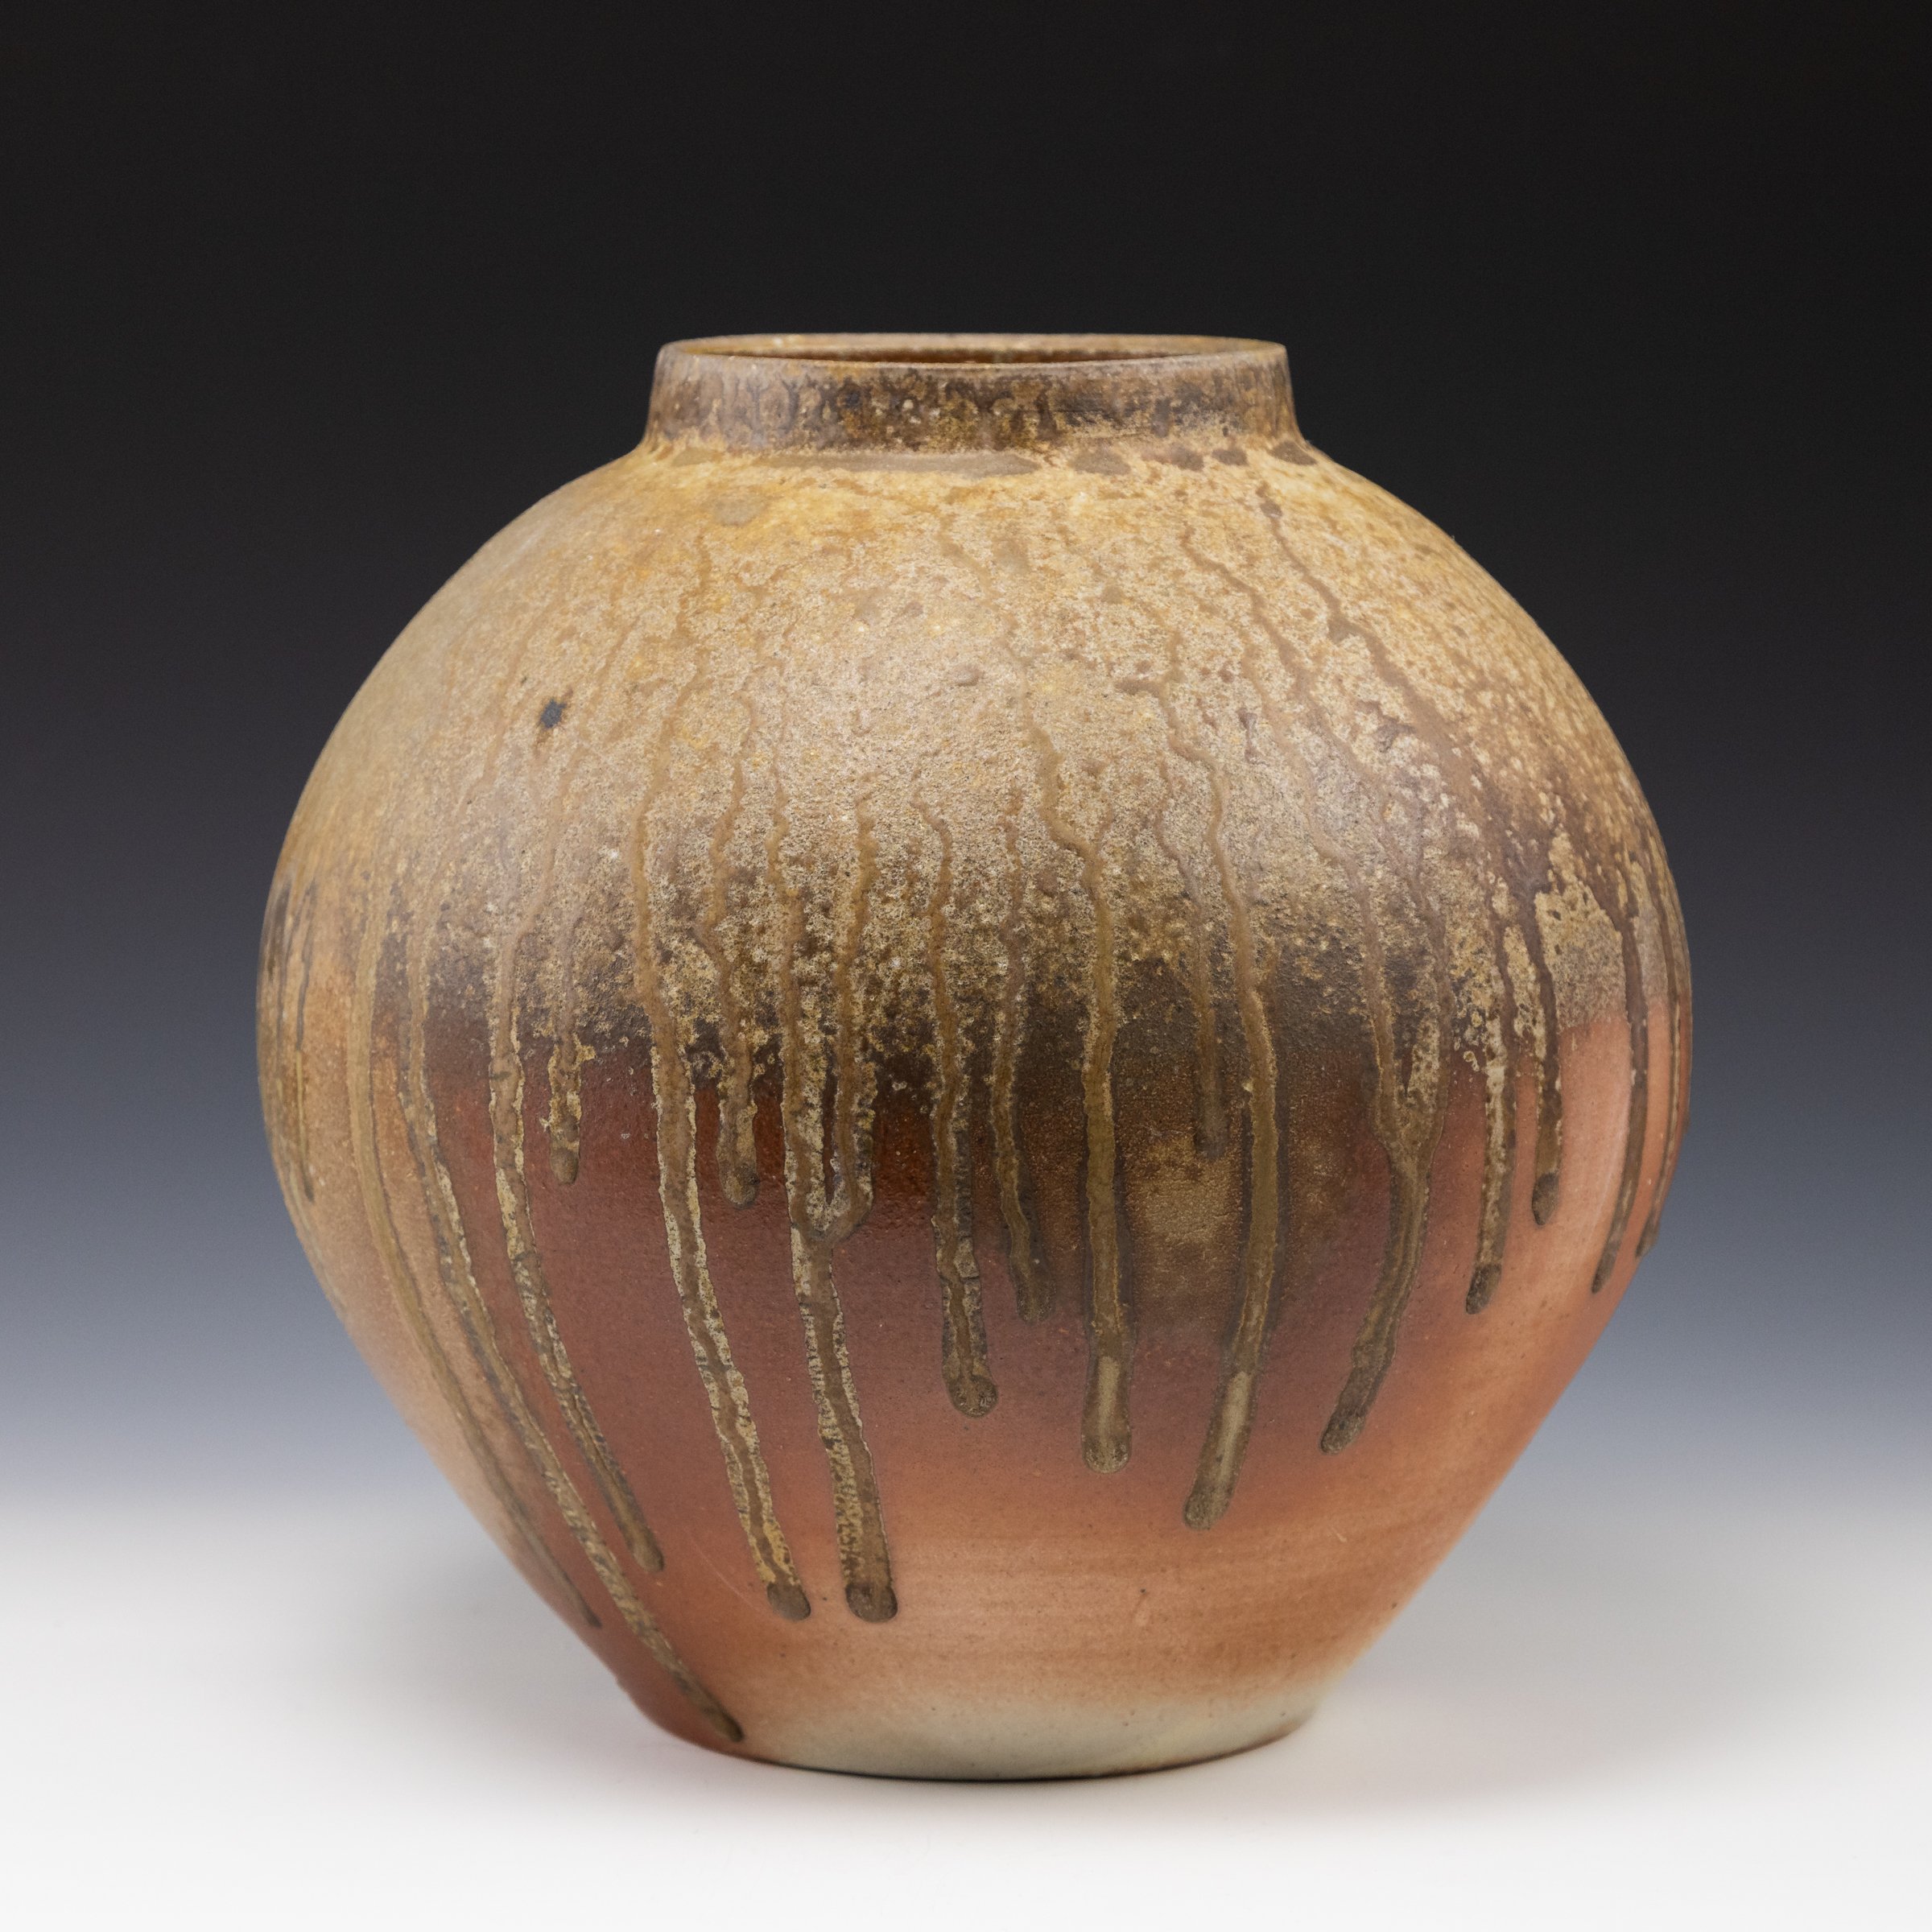 Fred Johnson, Wood fired vessel, 12" x 12" 12"